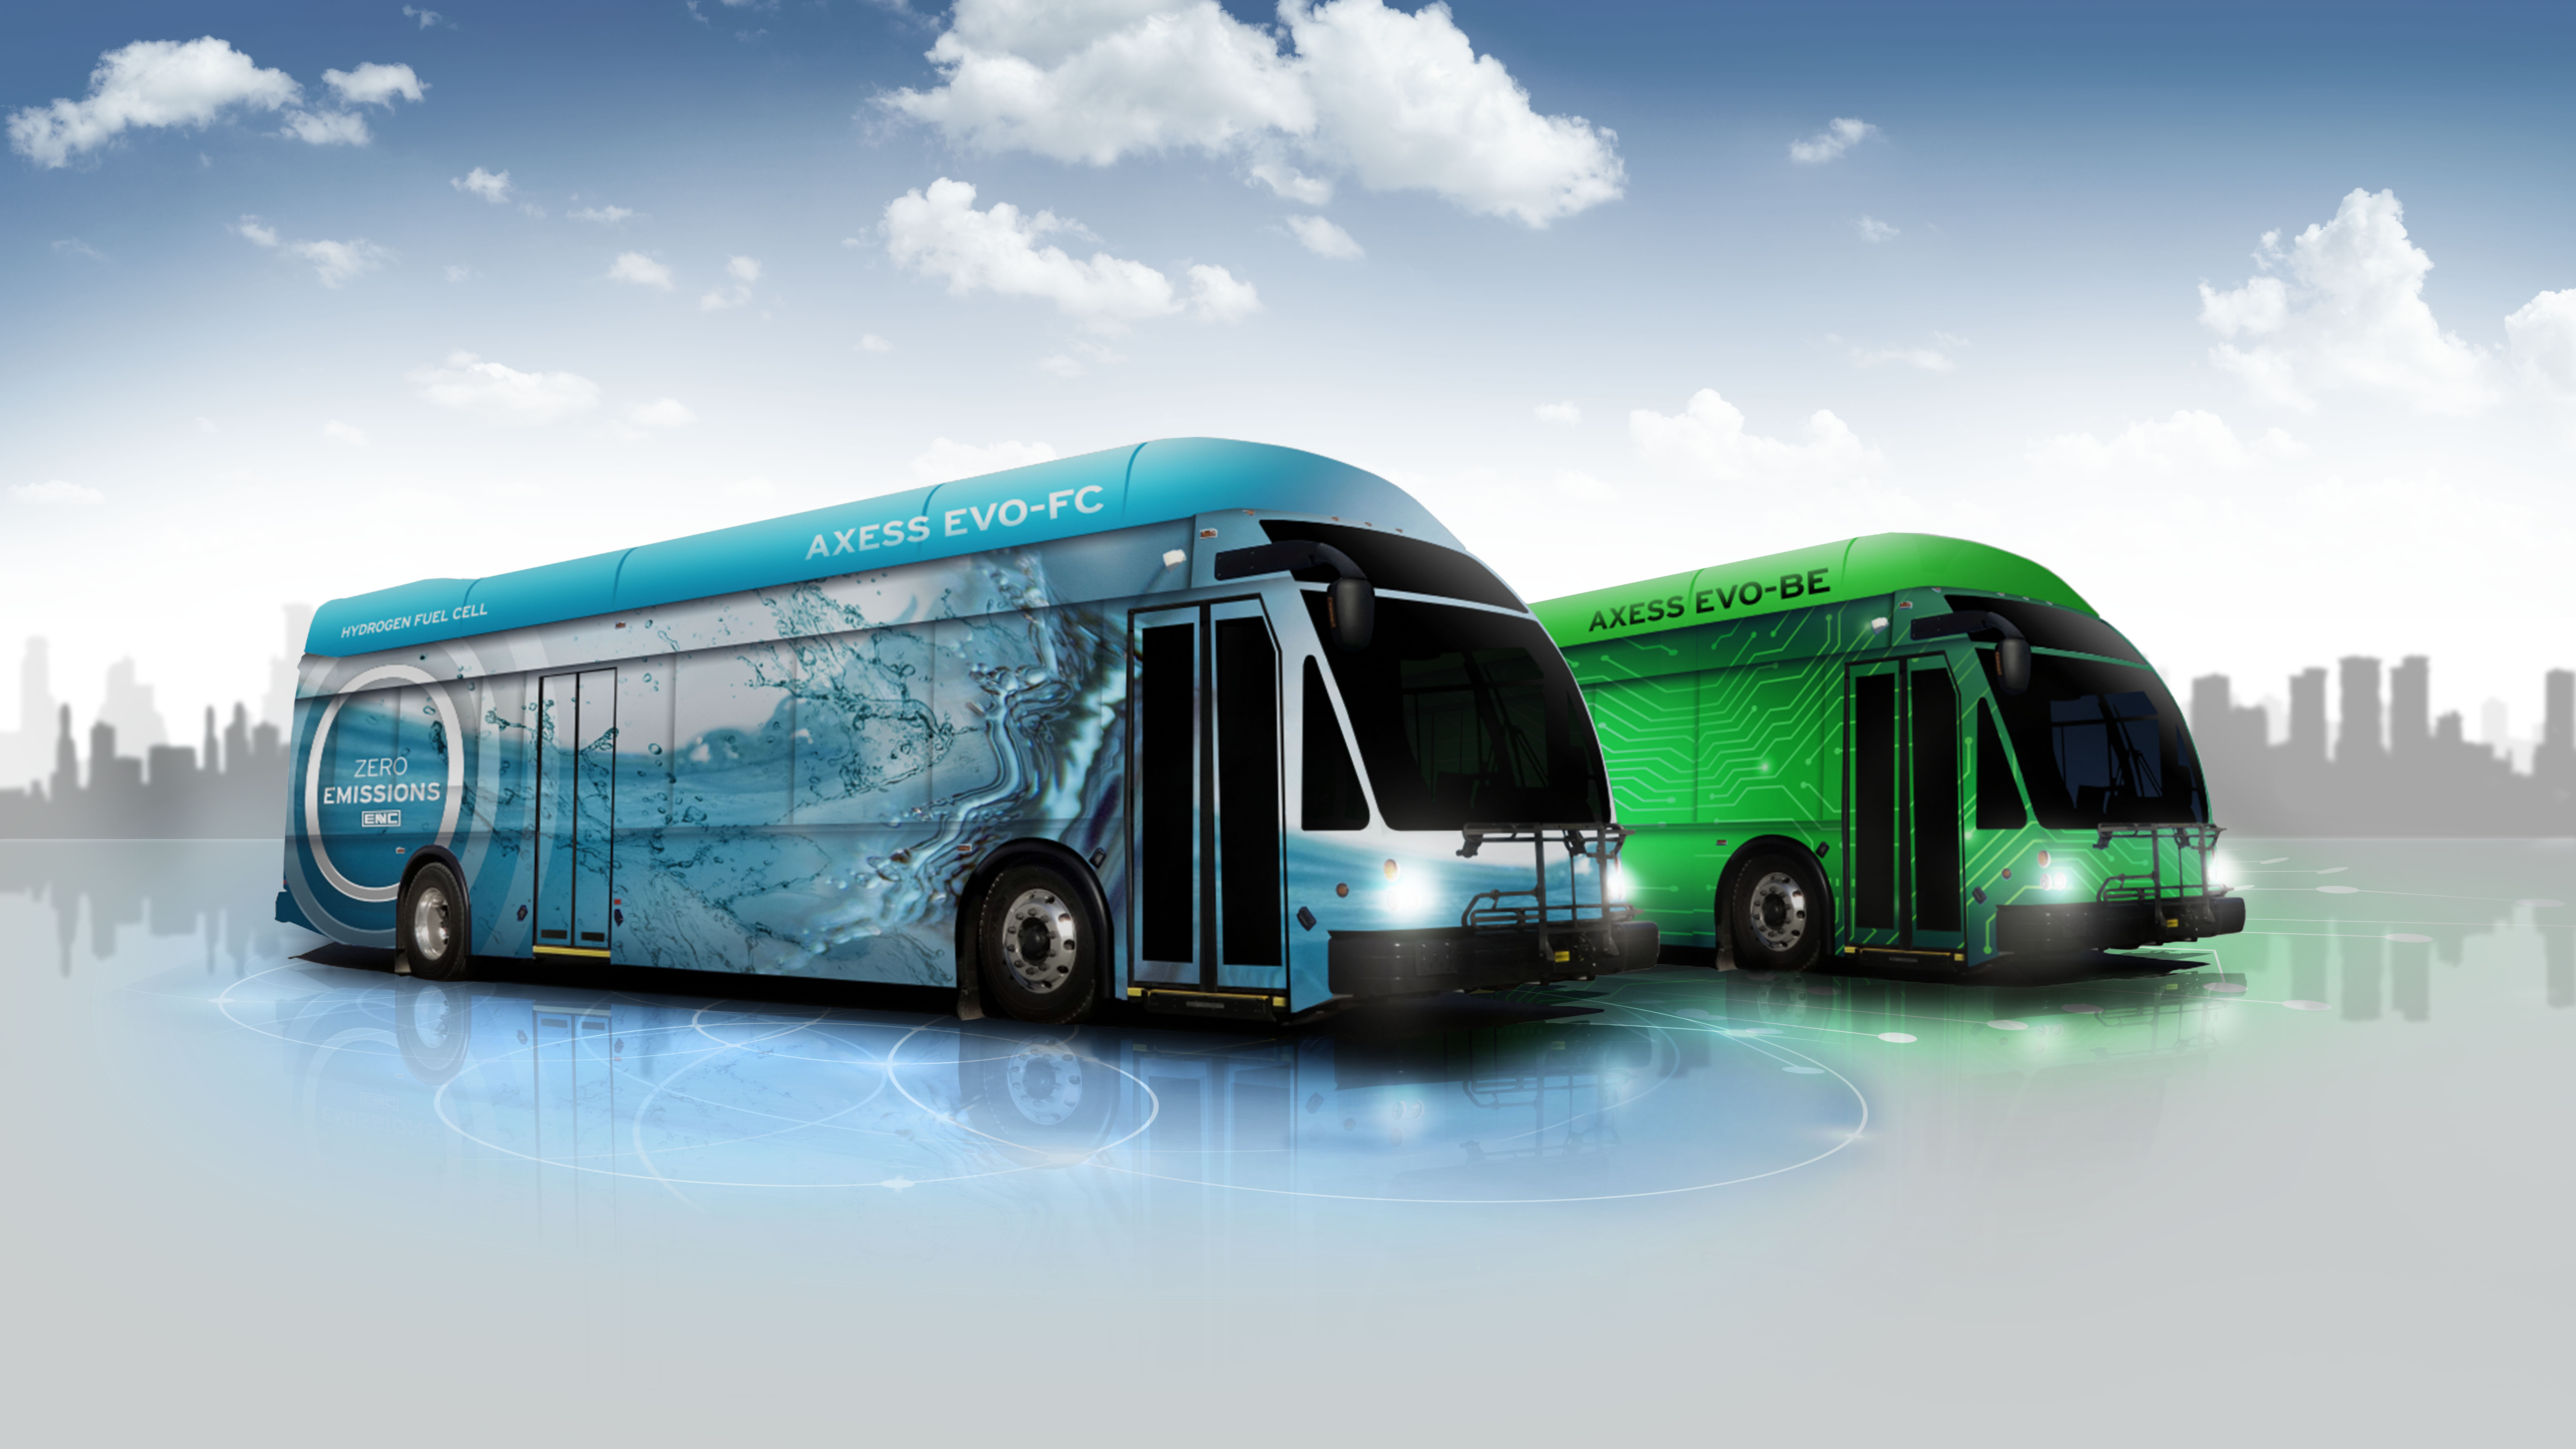 Electric drive solutions for ENC's next-generation zero emission transit buses